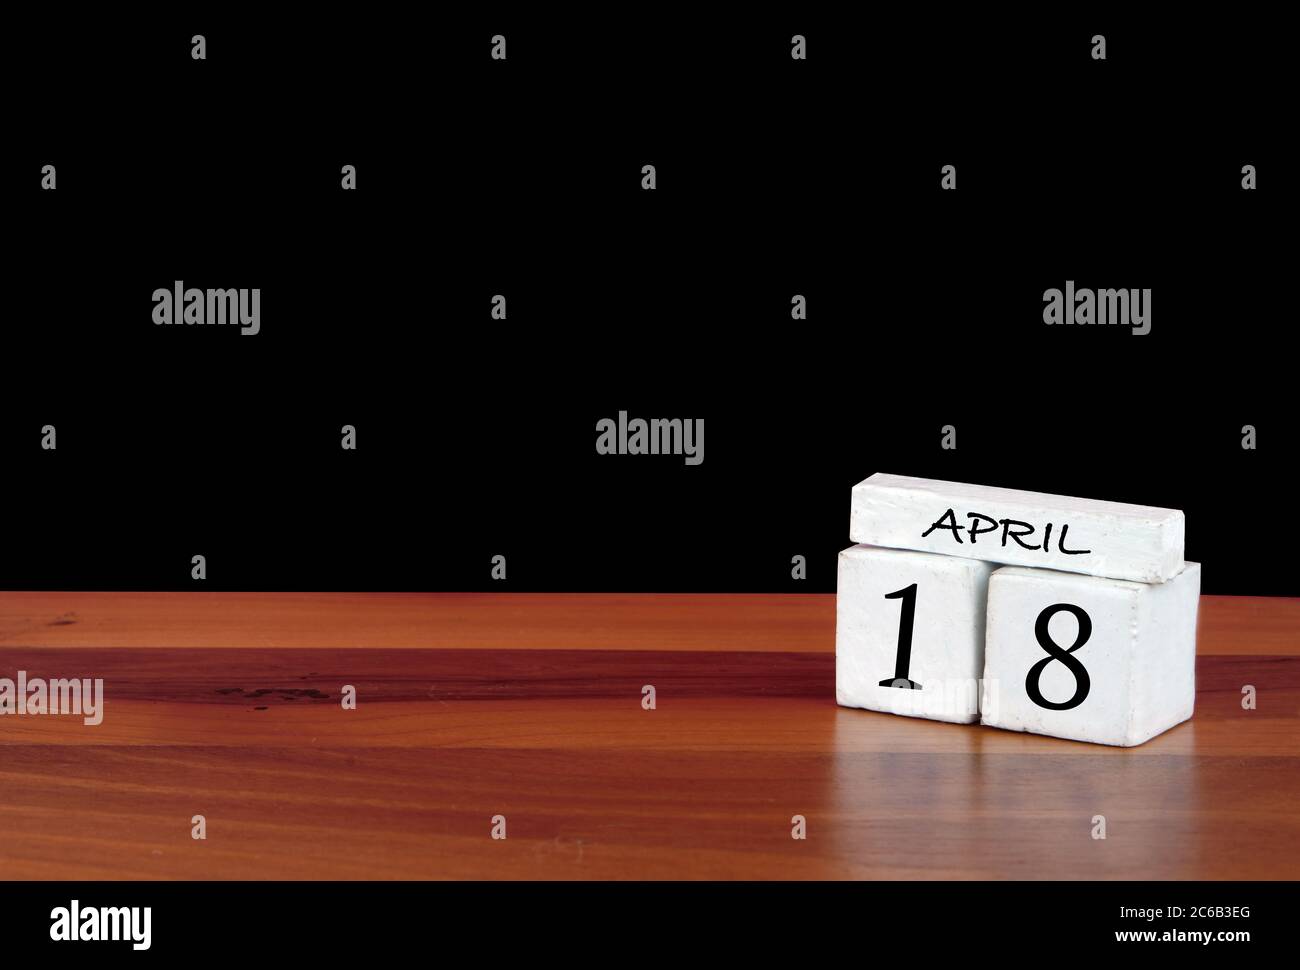 18 April calendar month. 18 days of the month. Reflected calendar on wooden floor with black background Stock Photo